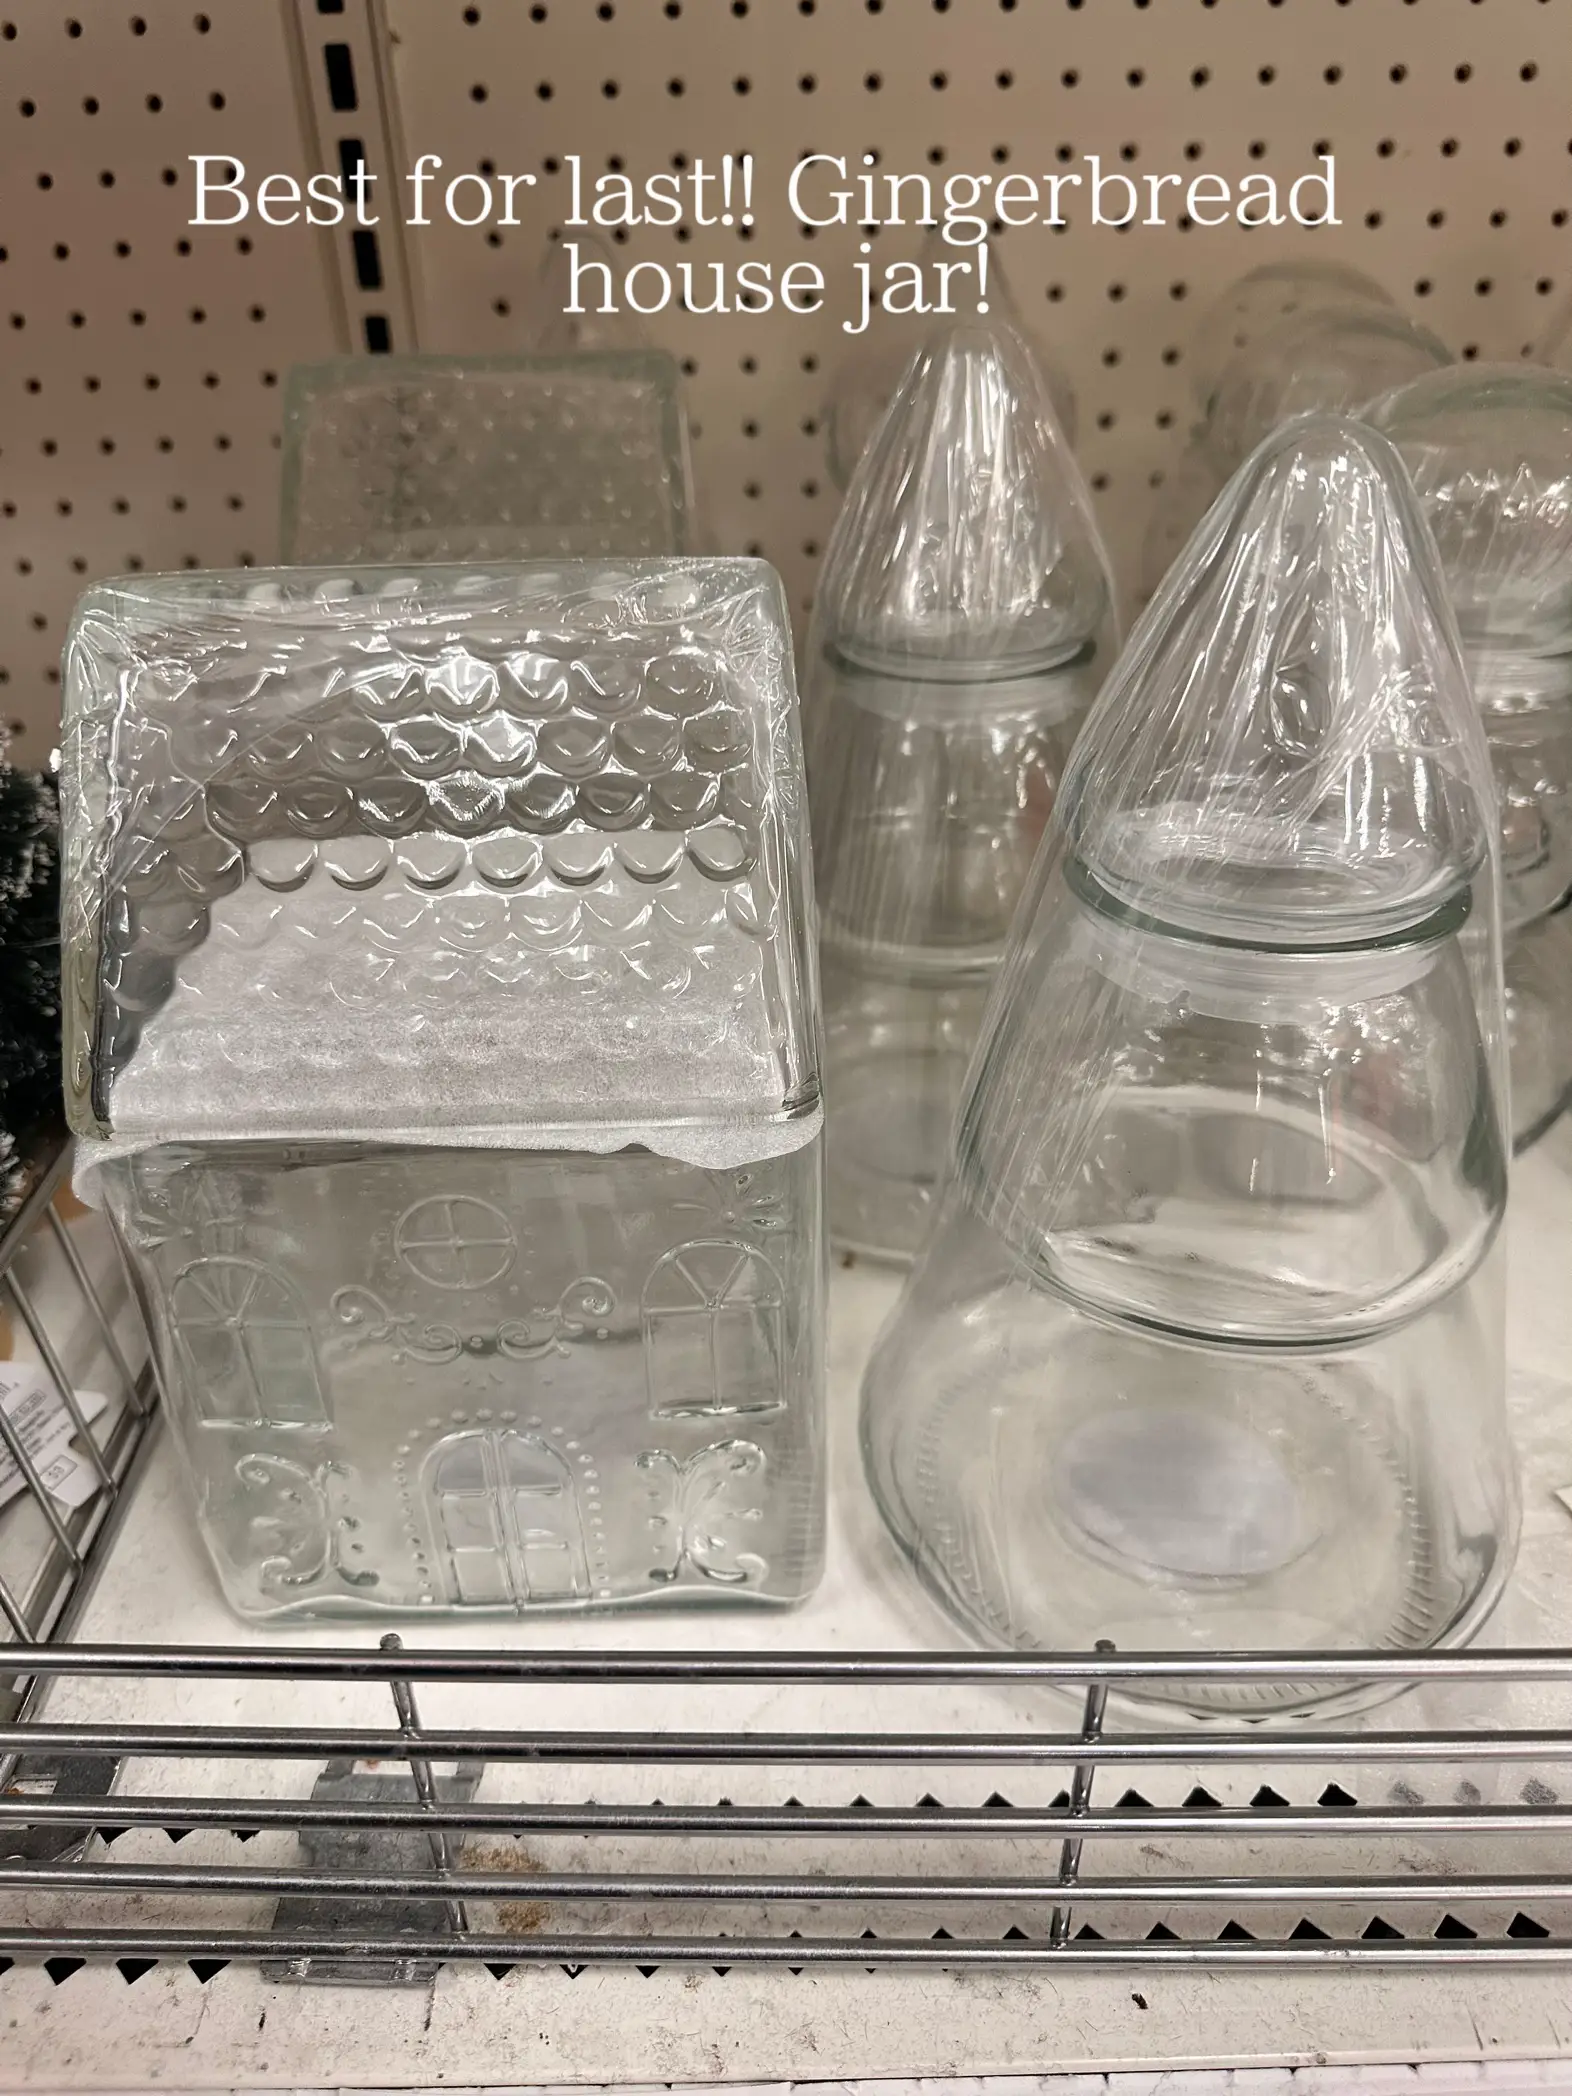  A shelf with several glass jars on it.